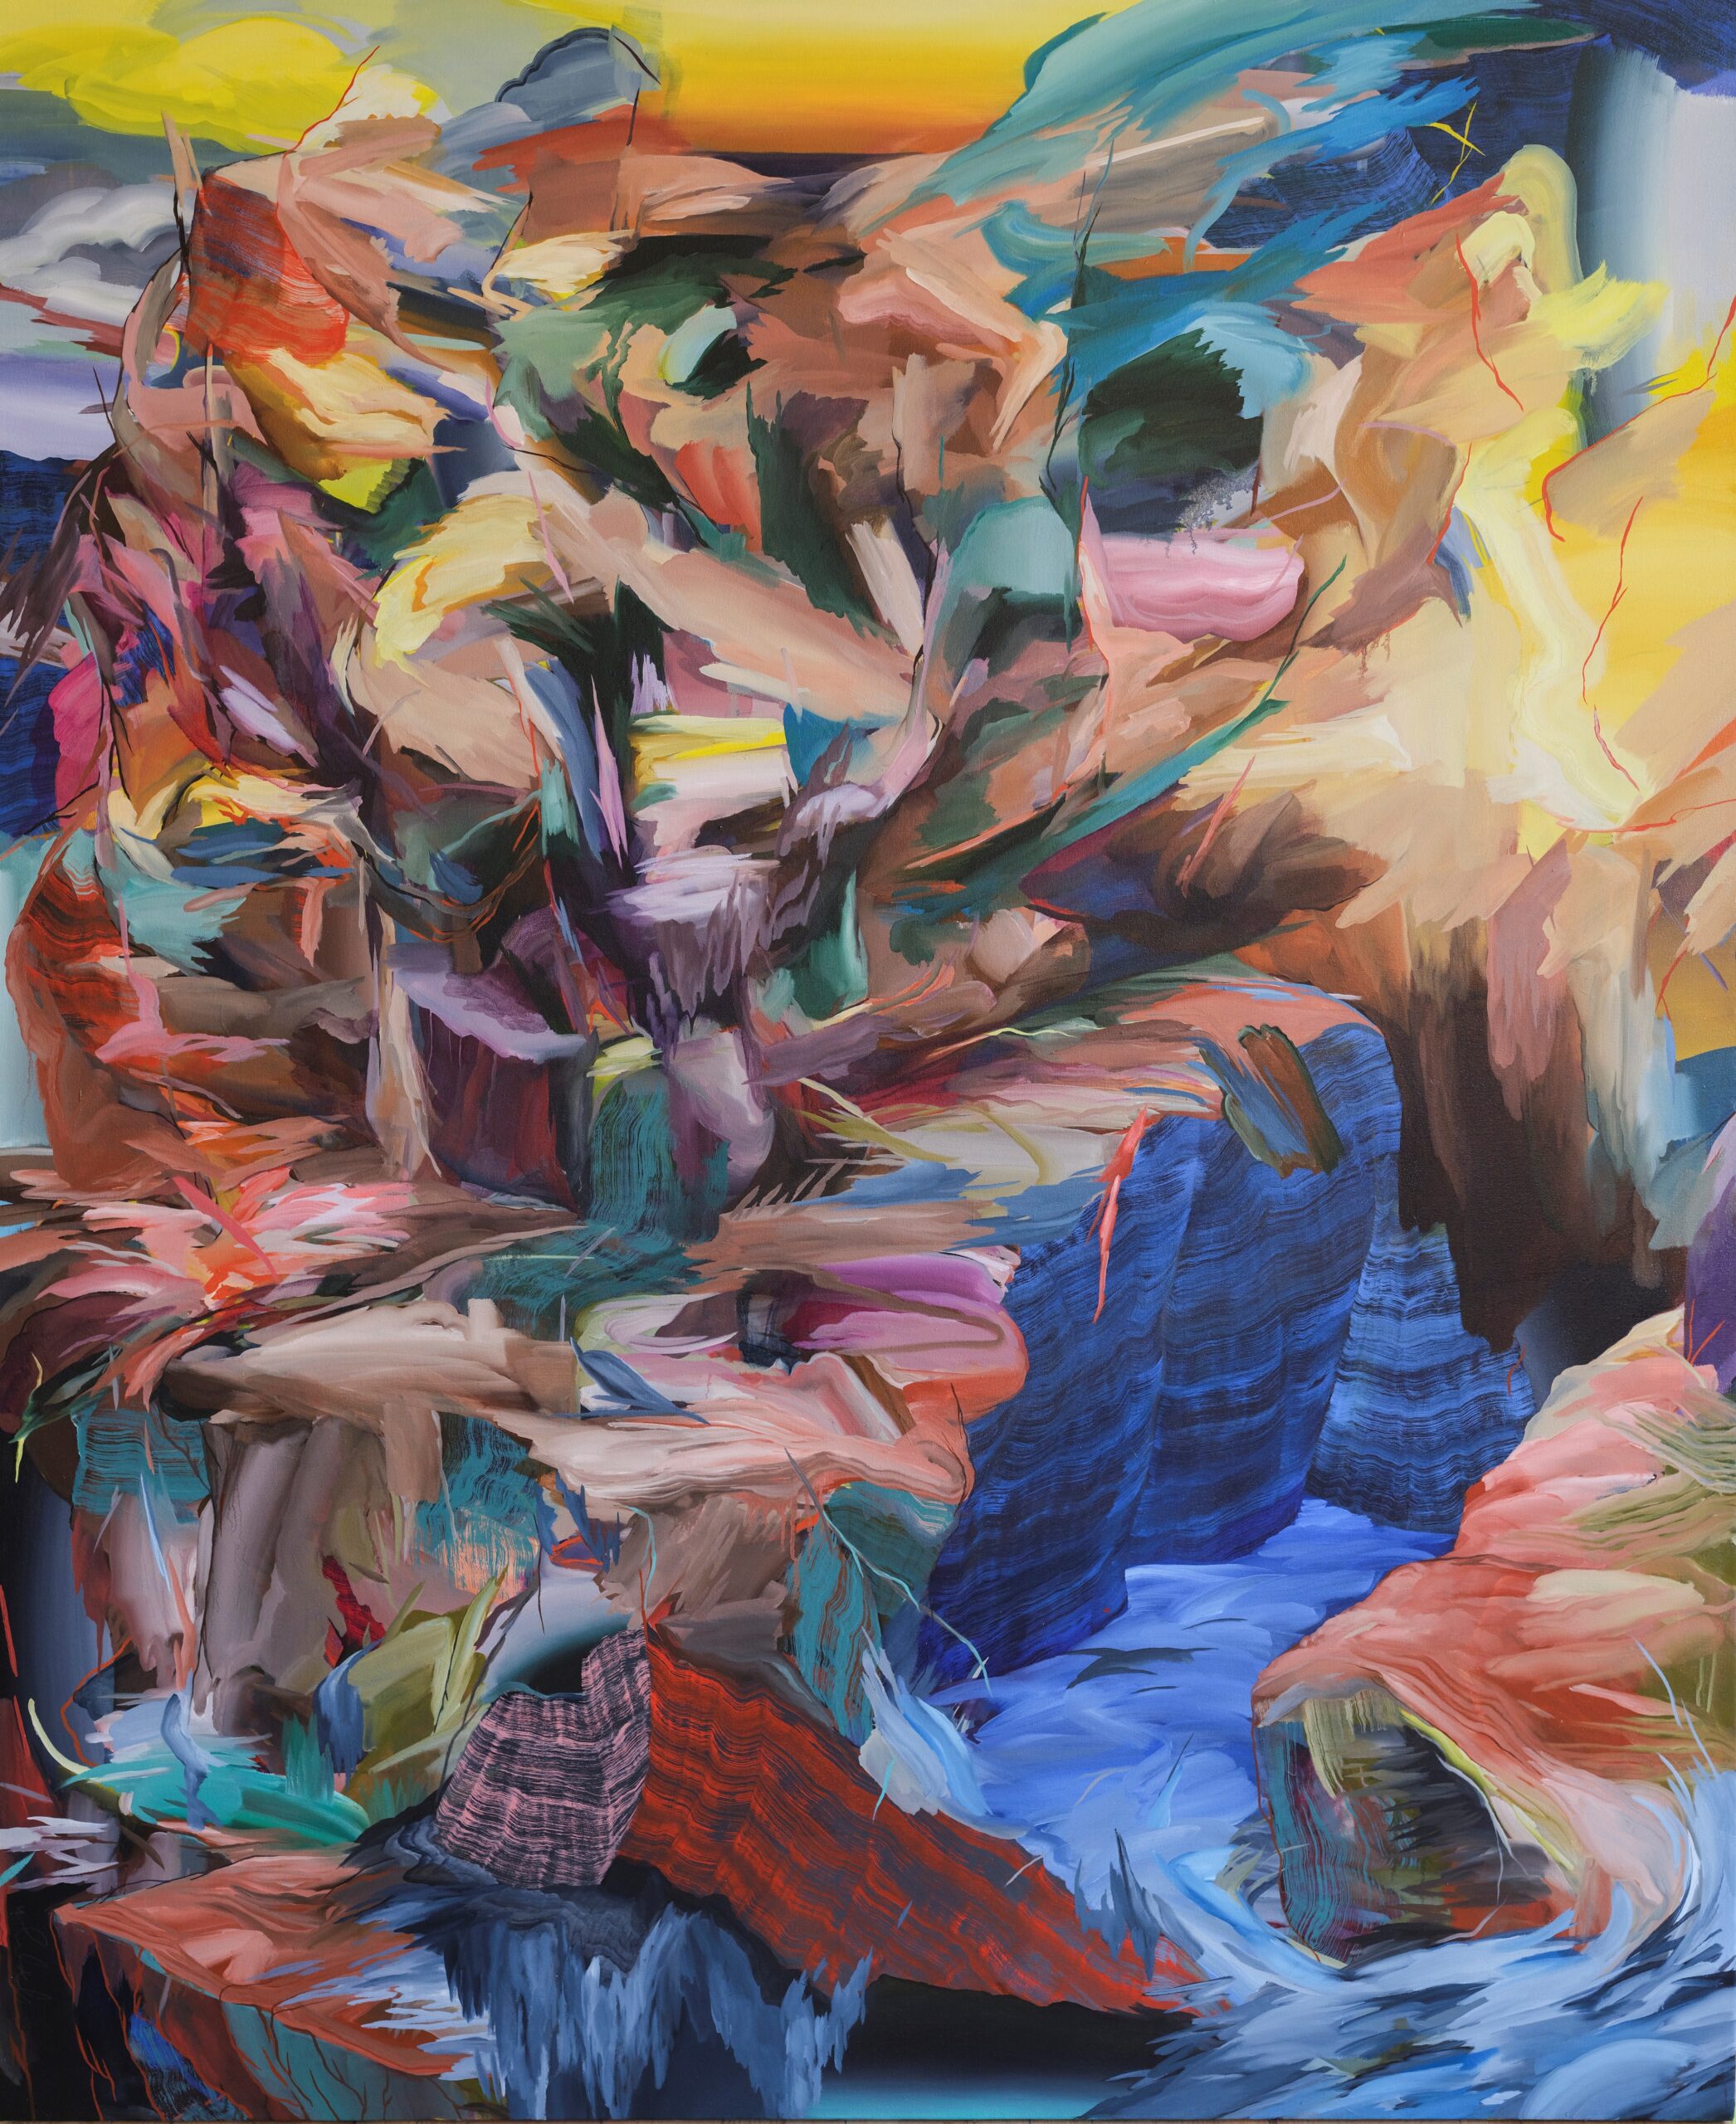 
		                					Steven J Yazzie		                																	
																											<i>Untitled Forces of Nature,</i>  
																																								2023, 
																																								oil on canvas, 
																																								78 x 64 inches 
																								
		                				